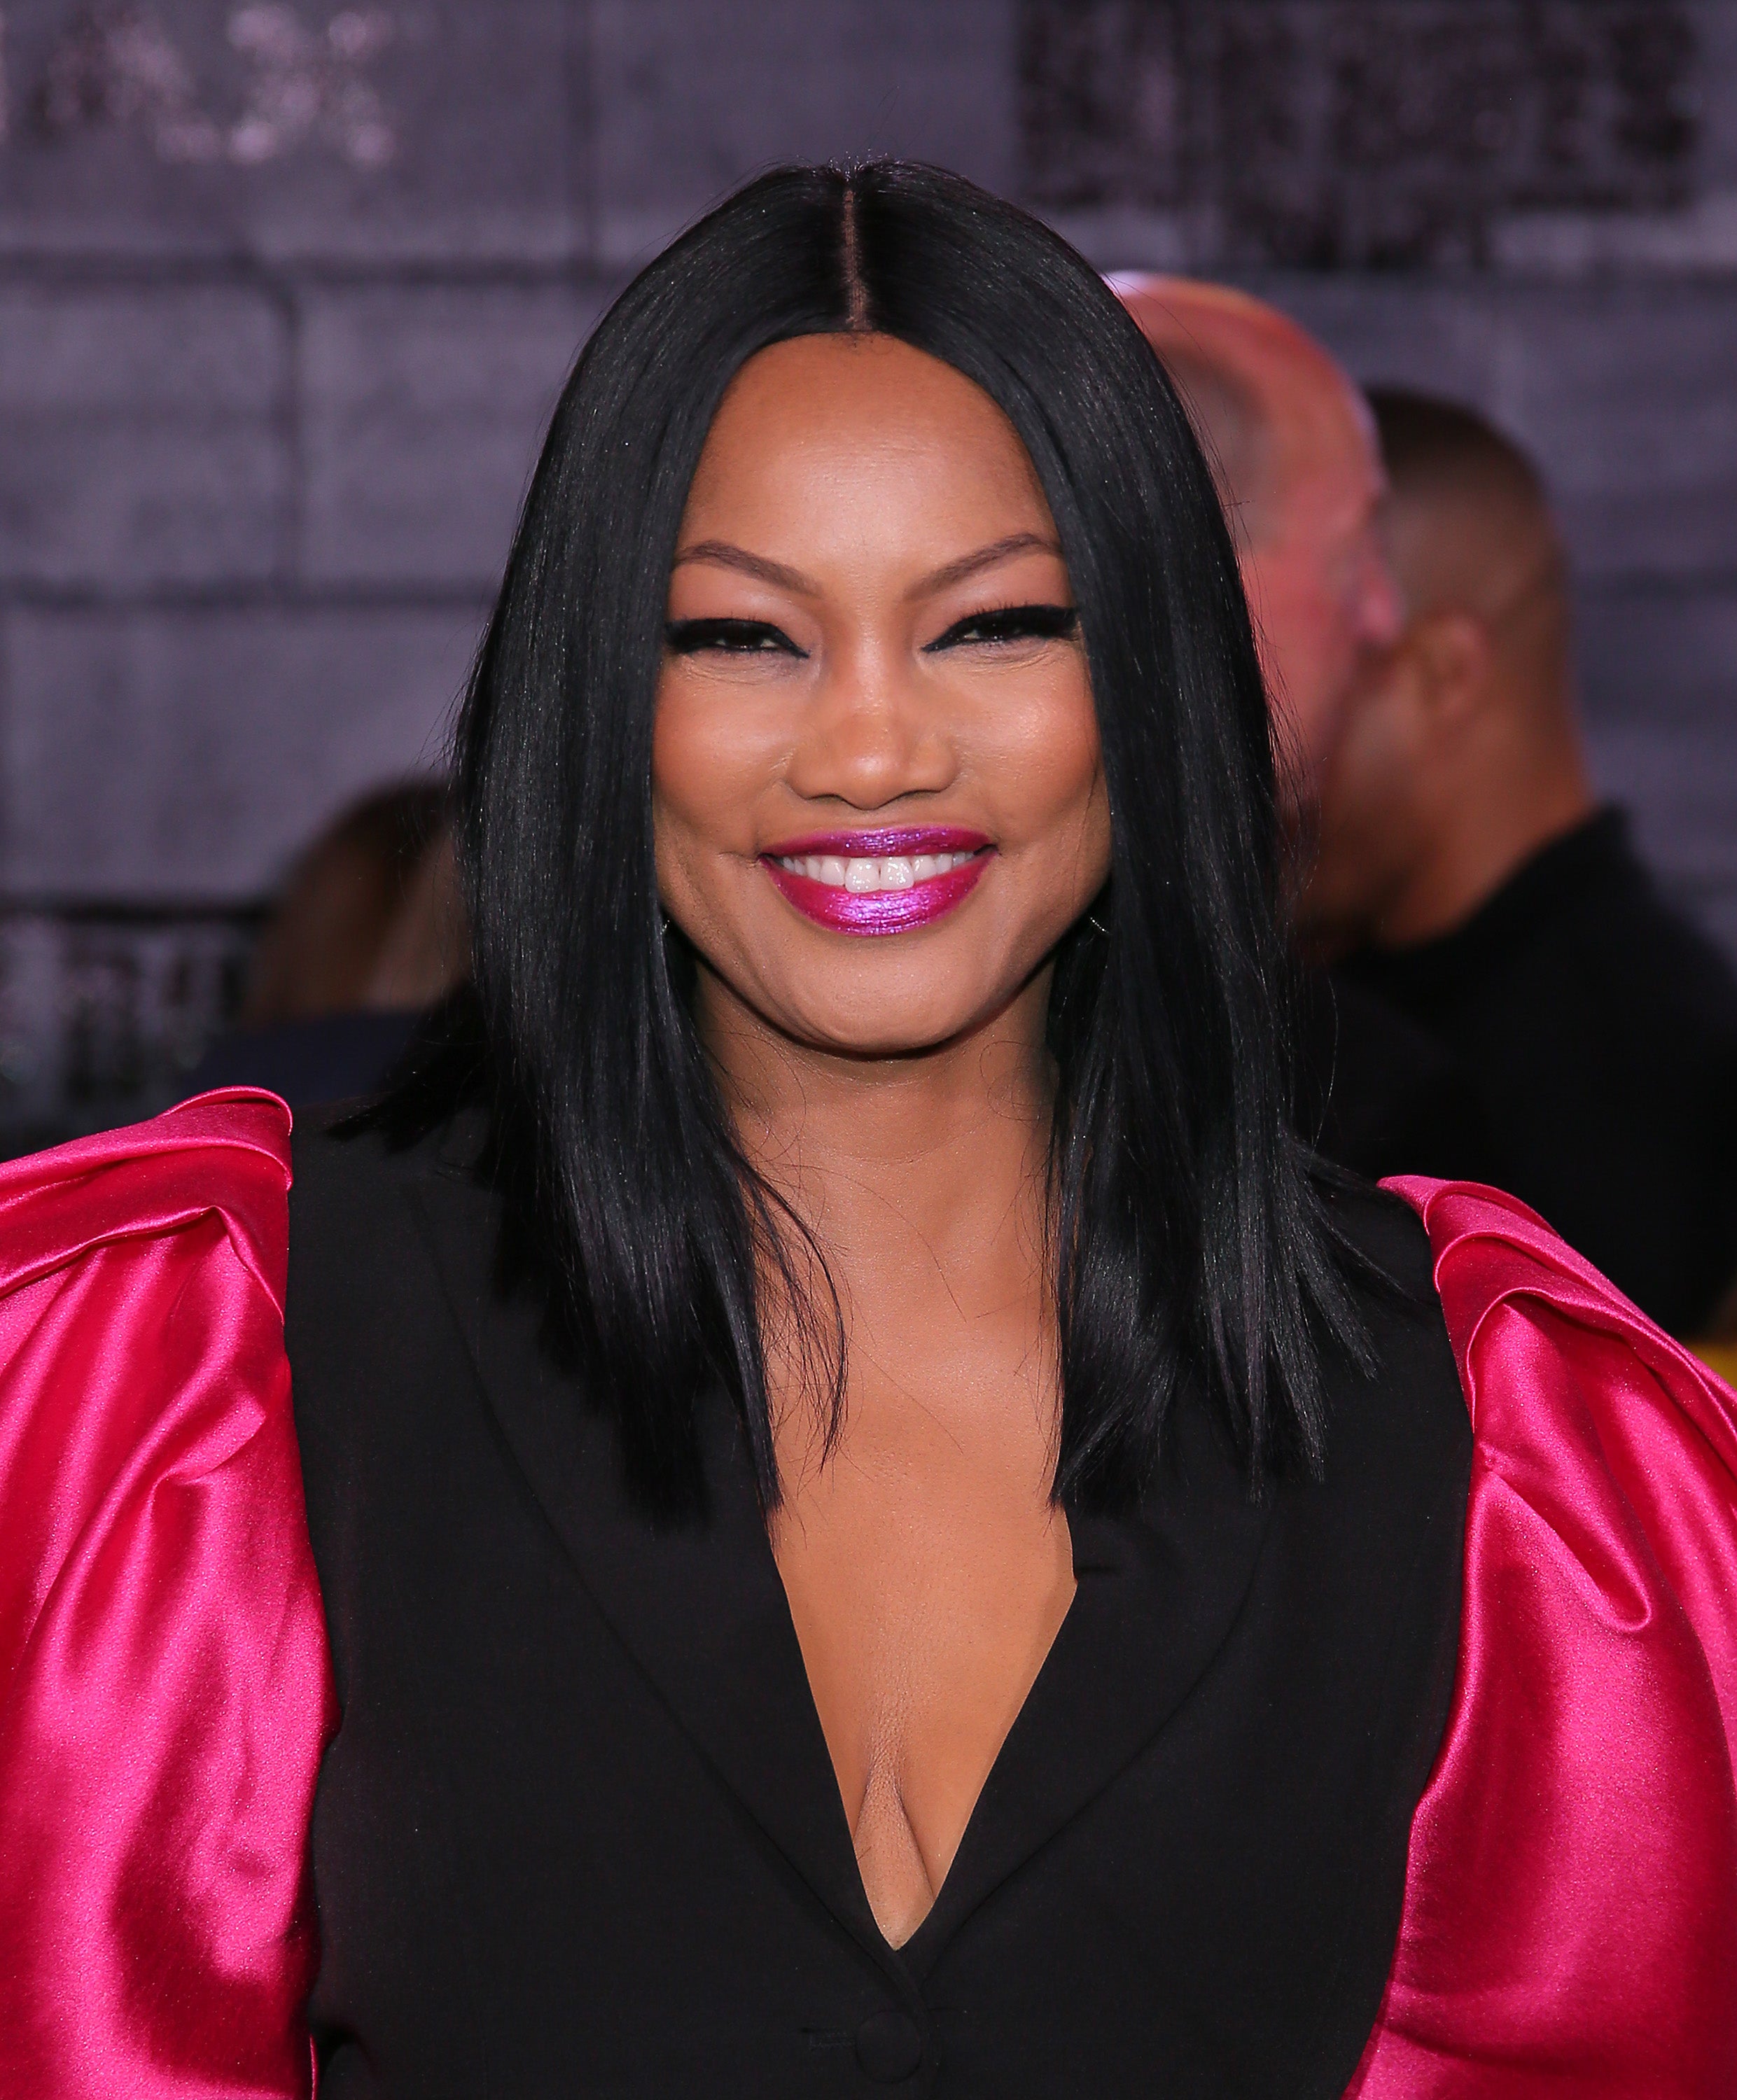 The Best Beauty Looks From The 'Bad Boys For Life' Premiere